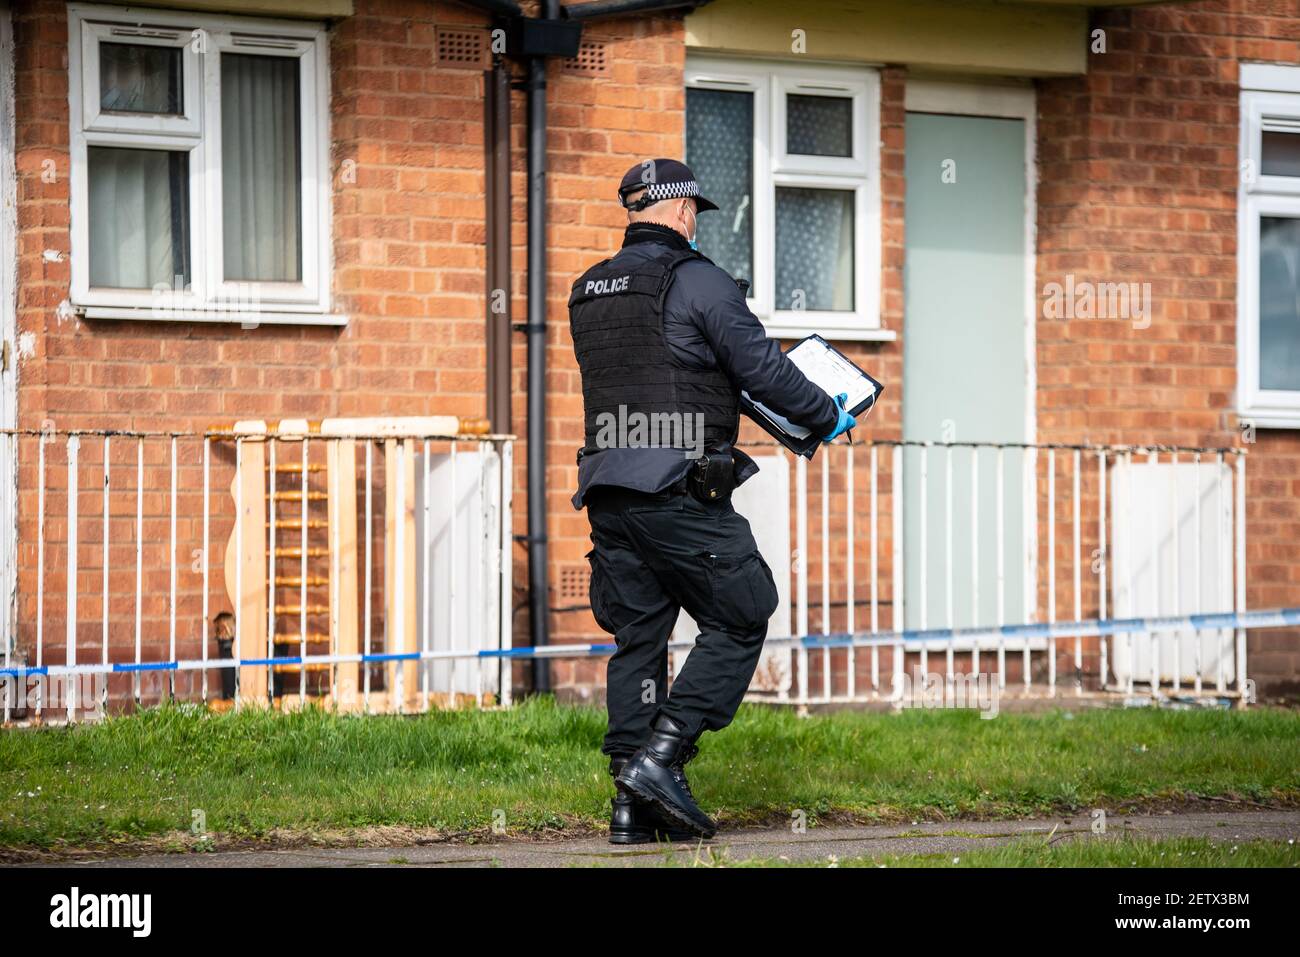 Perry Barr, Birmingham, UK. 2nd March 2021: A murder investigation has been launched after a man was stabbed in the neck to death early Tuesday morning on Perry Villa Drive in North Birmingham. Credit: Ryan Underwood / Alamy Live News Stock Photo